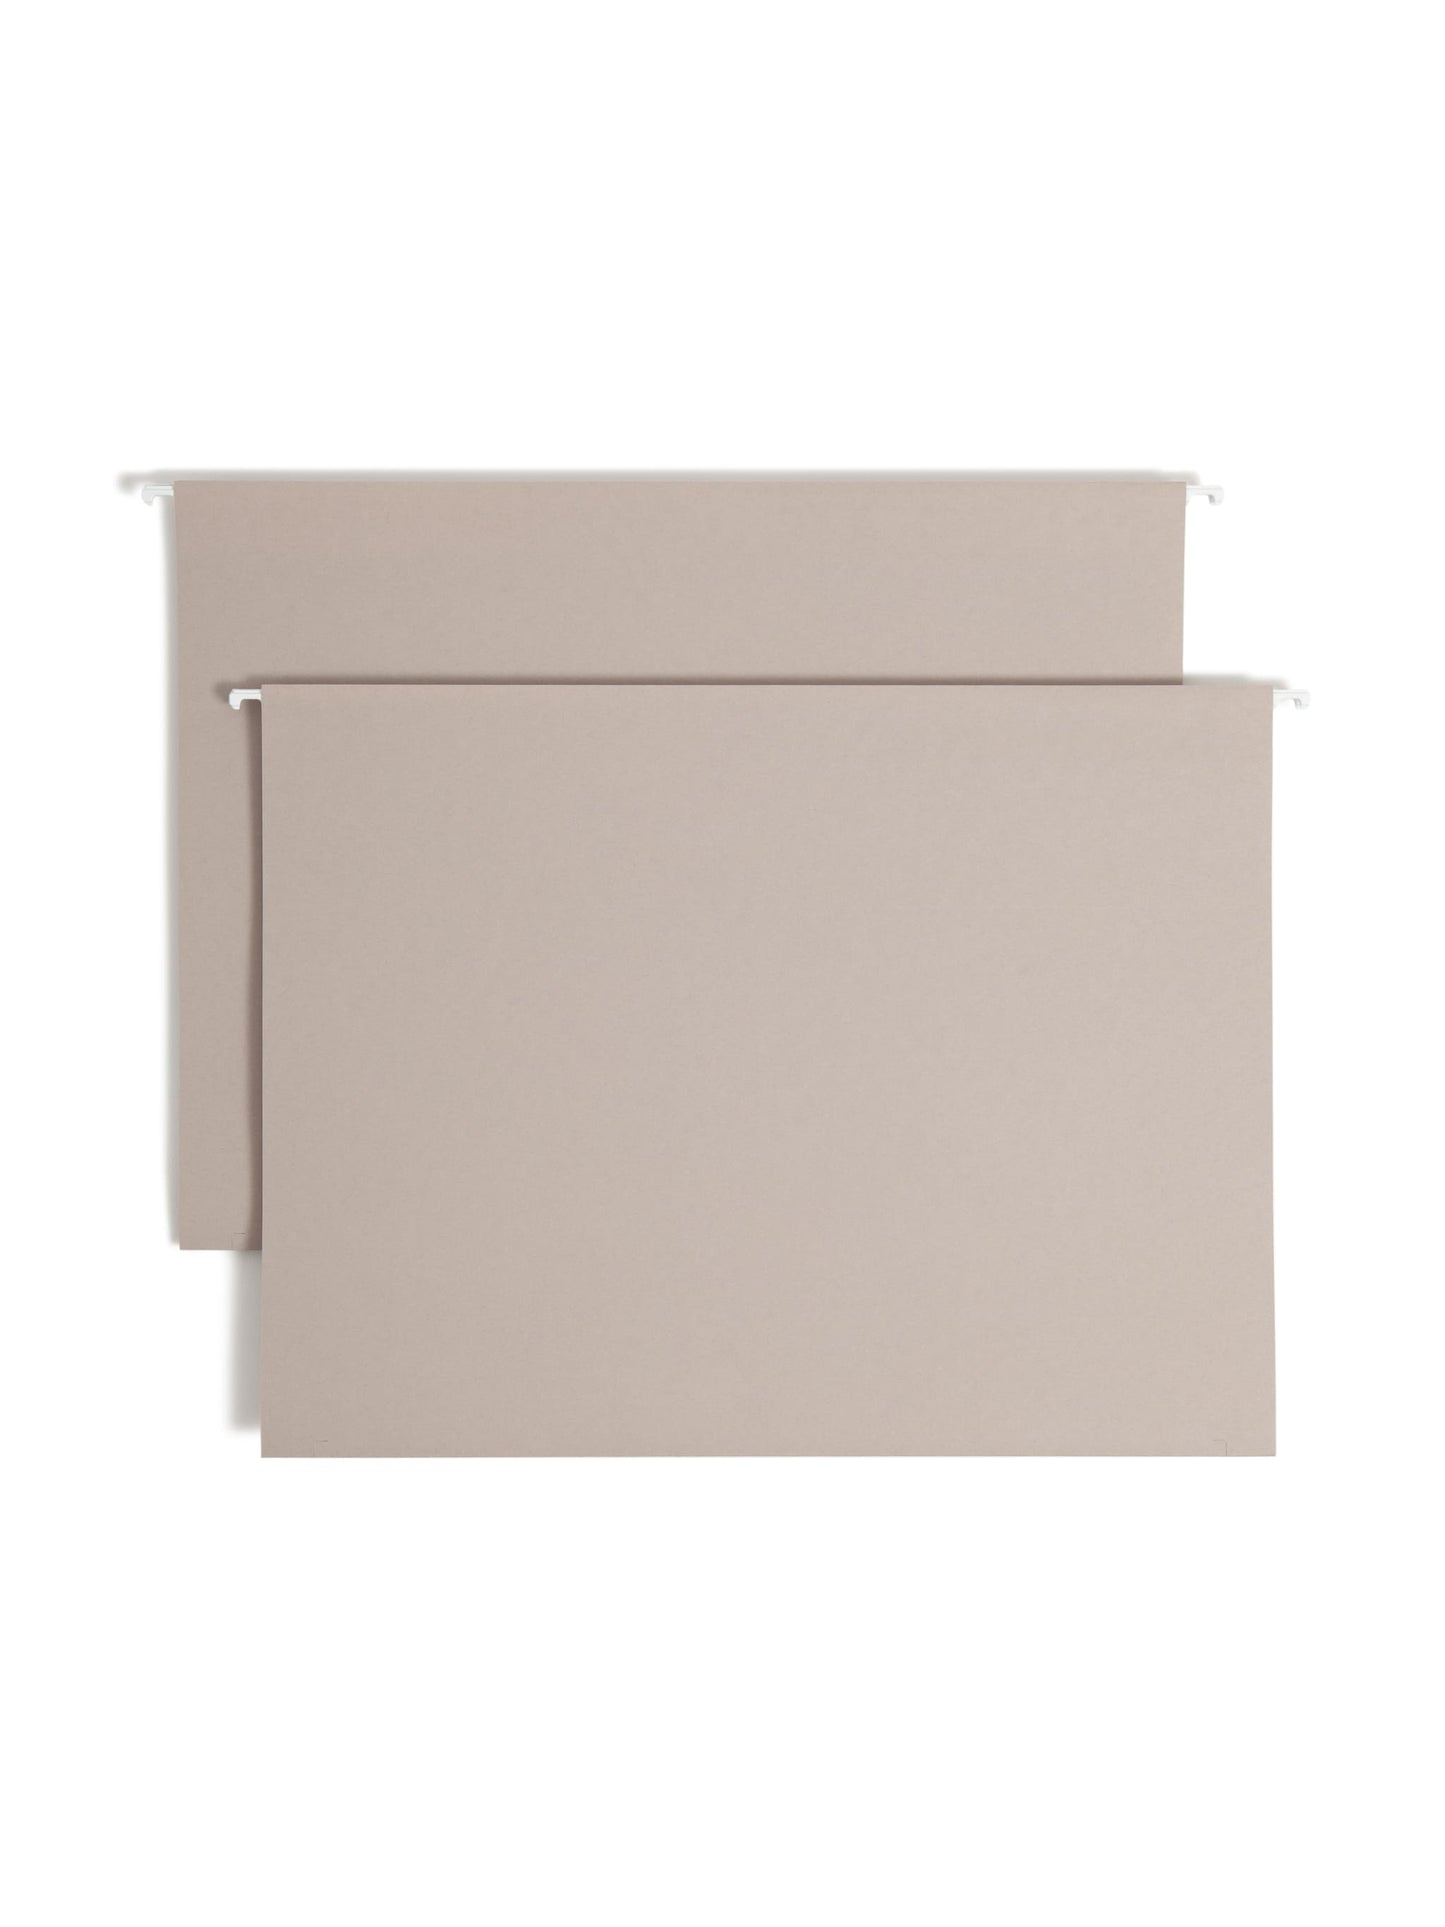 TUFF® Hanging Box Bottom File Folders with Easy Slide® Tabs, 4 inch Expansion, Gray Color, Legal Size, Set of 18, 086486643429